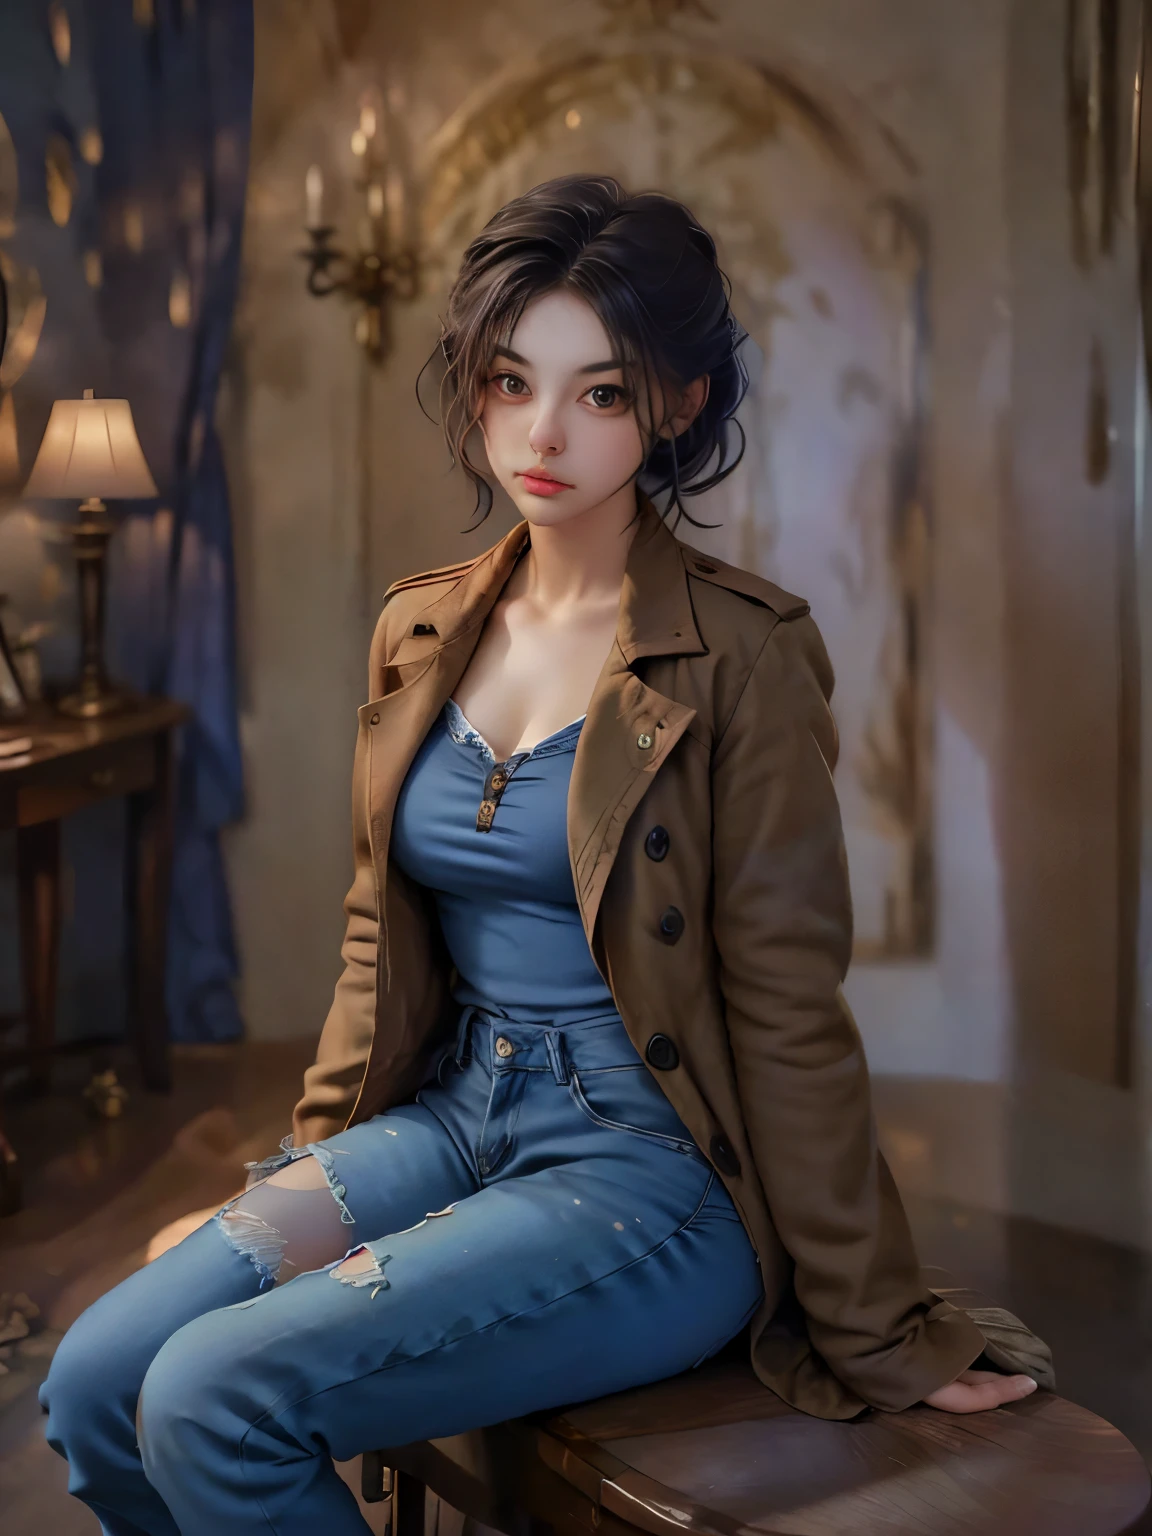 (suspense scene ((CONCEPT ART)), extremely detailed with a girl wearing jeans with brown coat and boots), (better lighting, better shadow, an extremely delicate and scary), (digital illustration), ((4k painting)), [(dynamic angle,((1girl)),white hair, (beautiful face, perfect face, scared,) expression of fear, torn clothes, a gun in hand, sitting on the floor, darkness, scary house),  [:(dark, mysterious, game paint, sinister setting, jagged corridors, big house, deadly silence):]